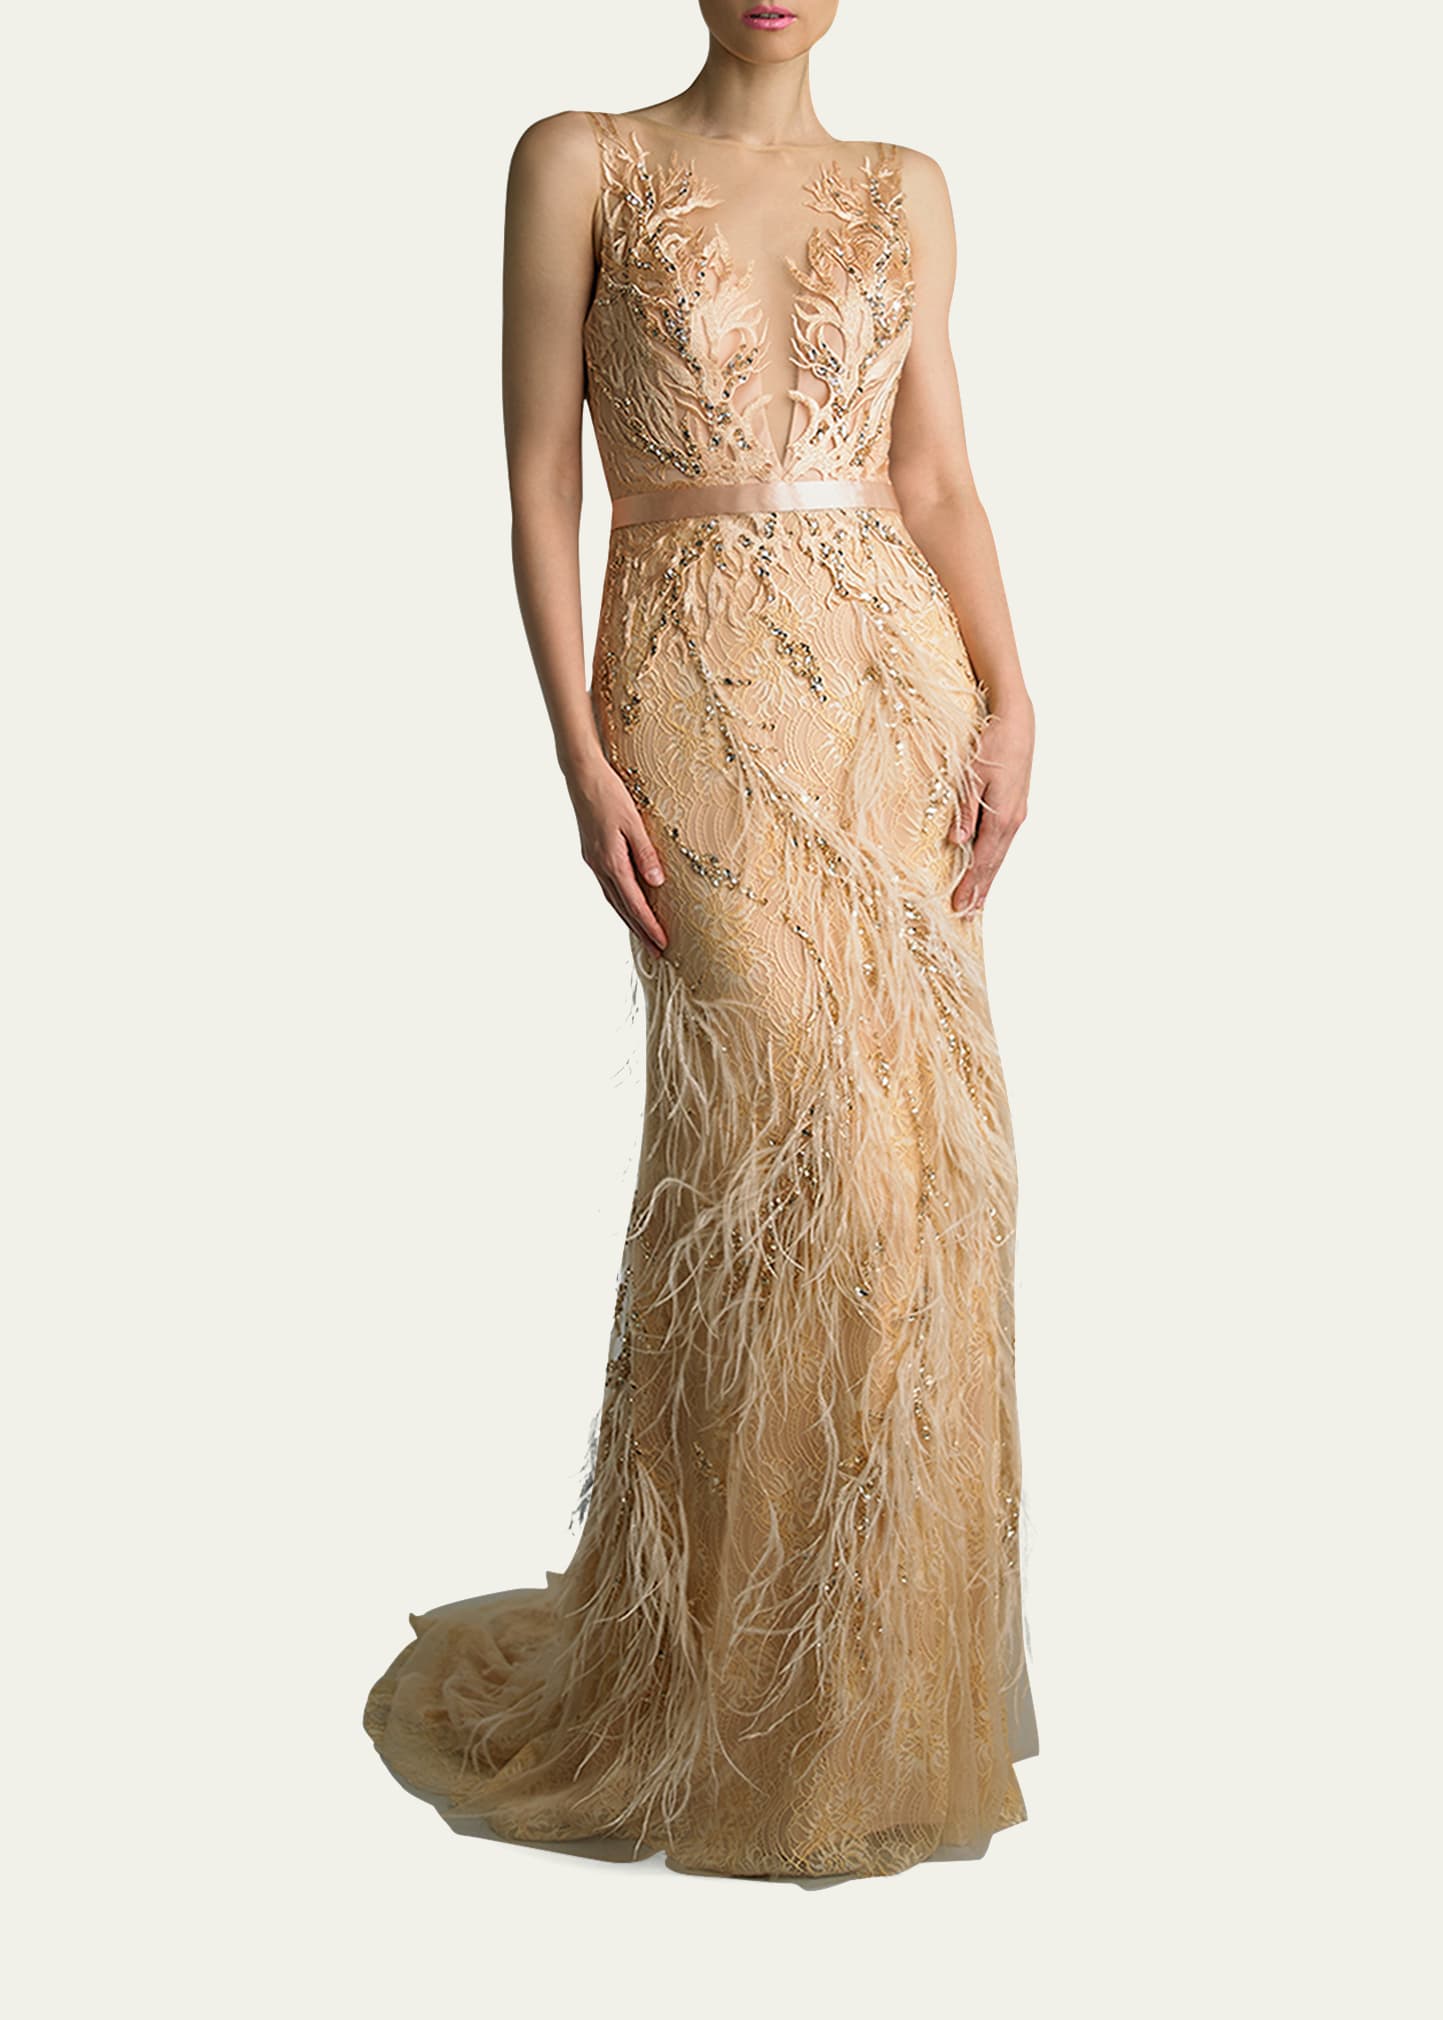 Basix Feathered Lace Deep V-Neck Gown